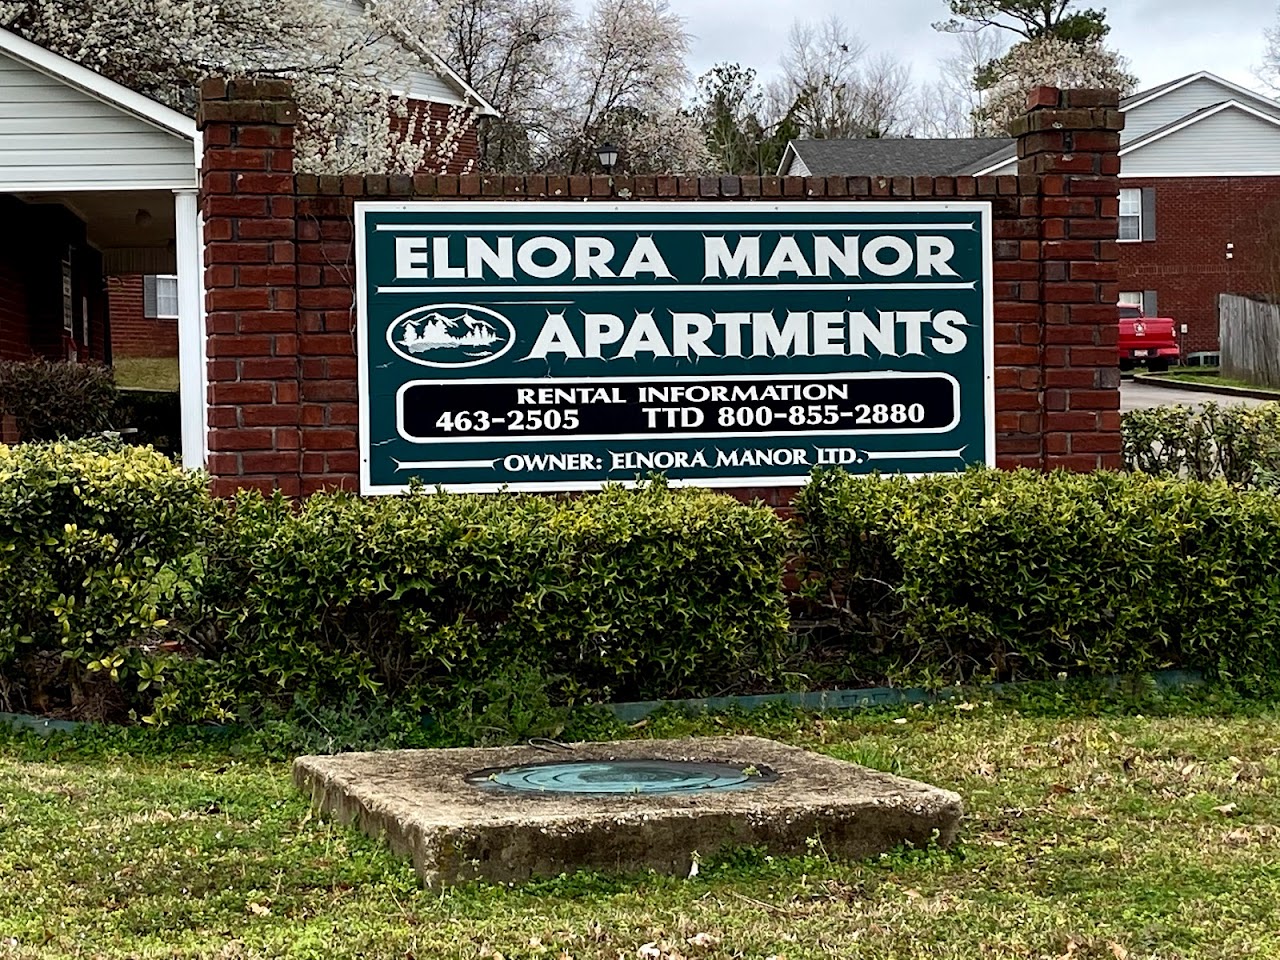 Photo of ELNORA MANOR. Affordable housing located at 74 ADAMS ST HEFLIN, AL 36264